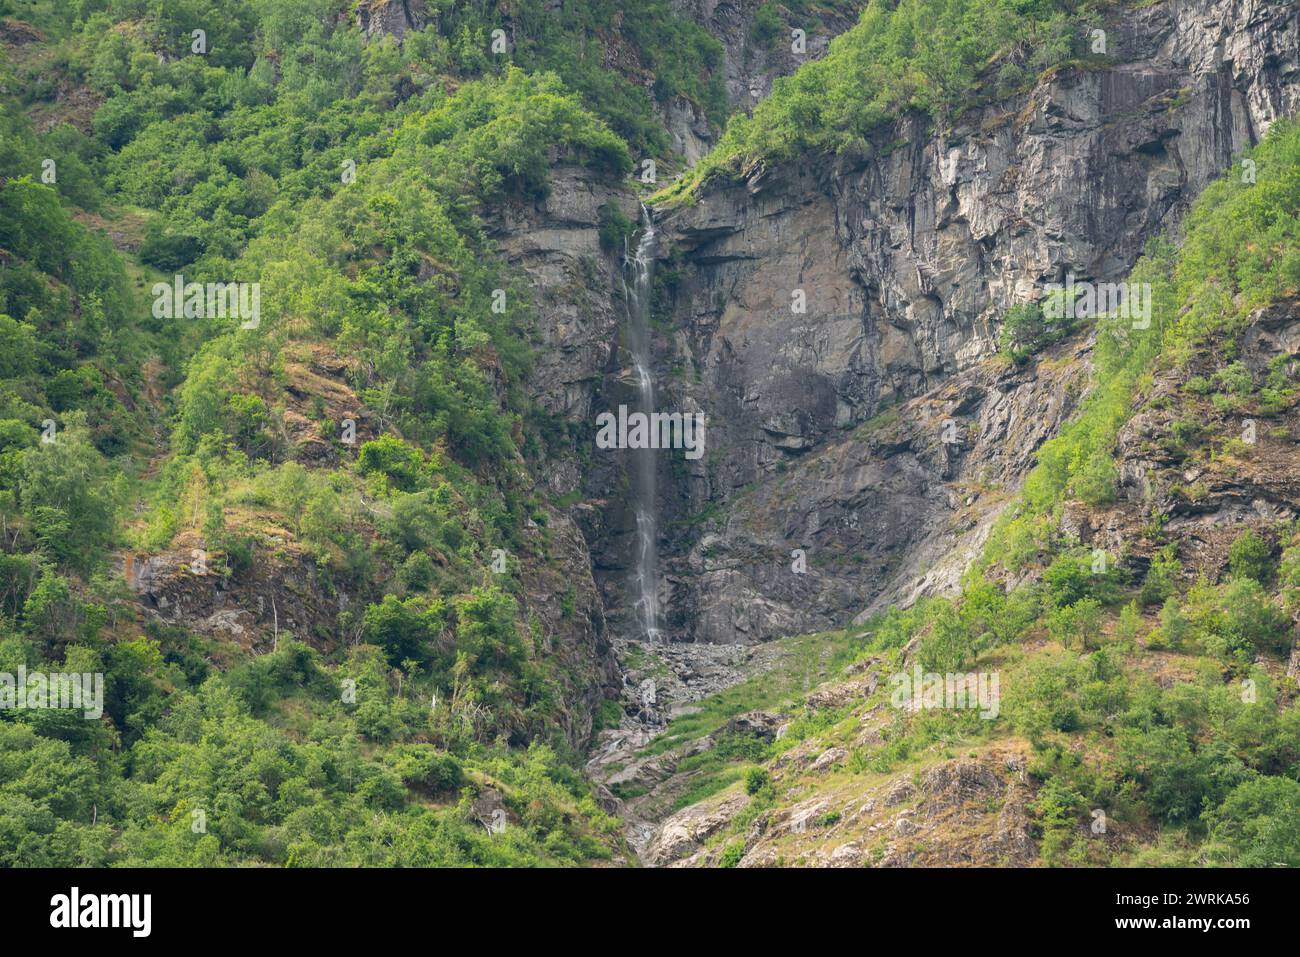 Norwegian fjord mountain nature view with a waterfall that has washed a cave in the mountain and green trees growing at the foot of the mountain Stock Photo